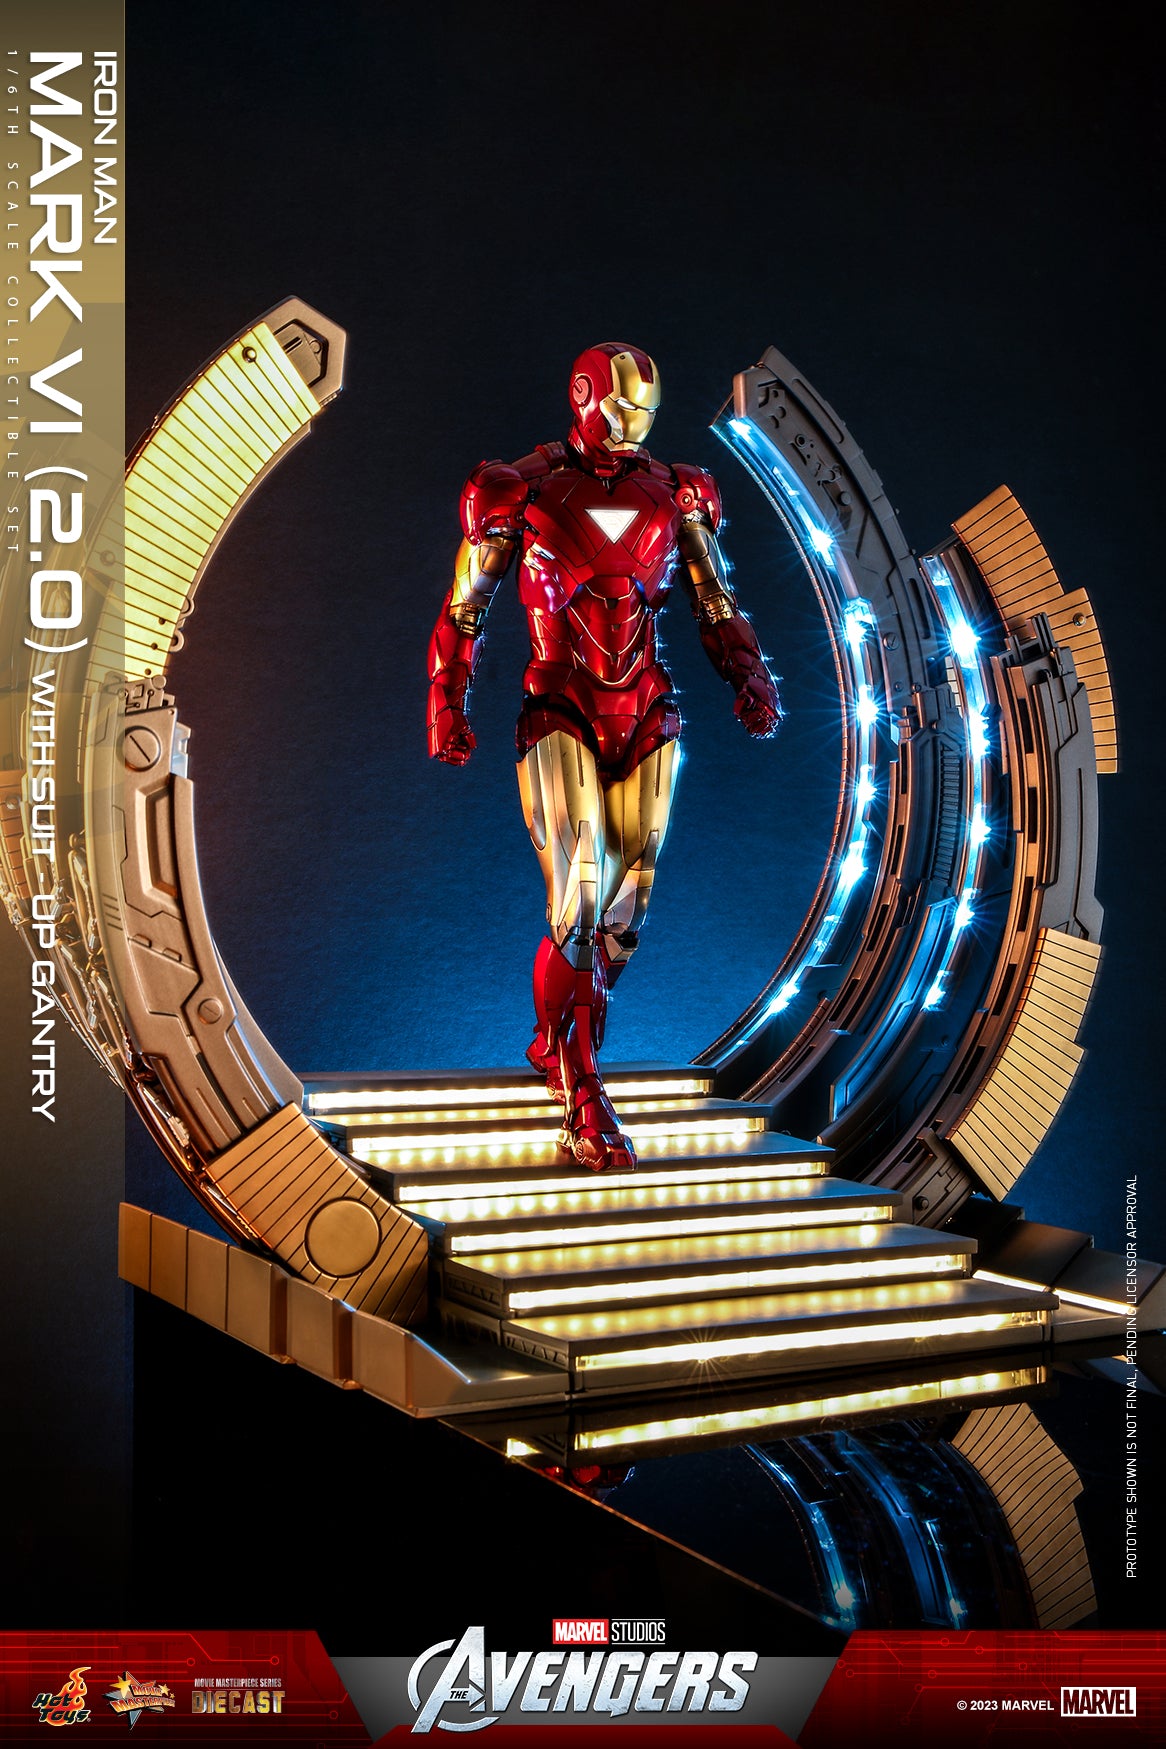 Hot Toys - MMS688D53 - The Avengers - Iron Man Mark VI (2.0) with Suit-Up Gantry - Marvelous Toys